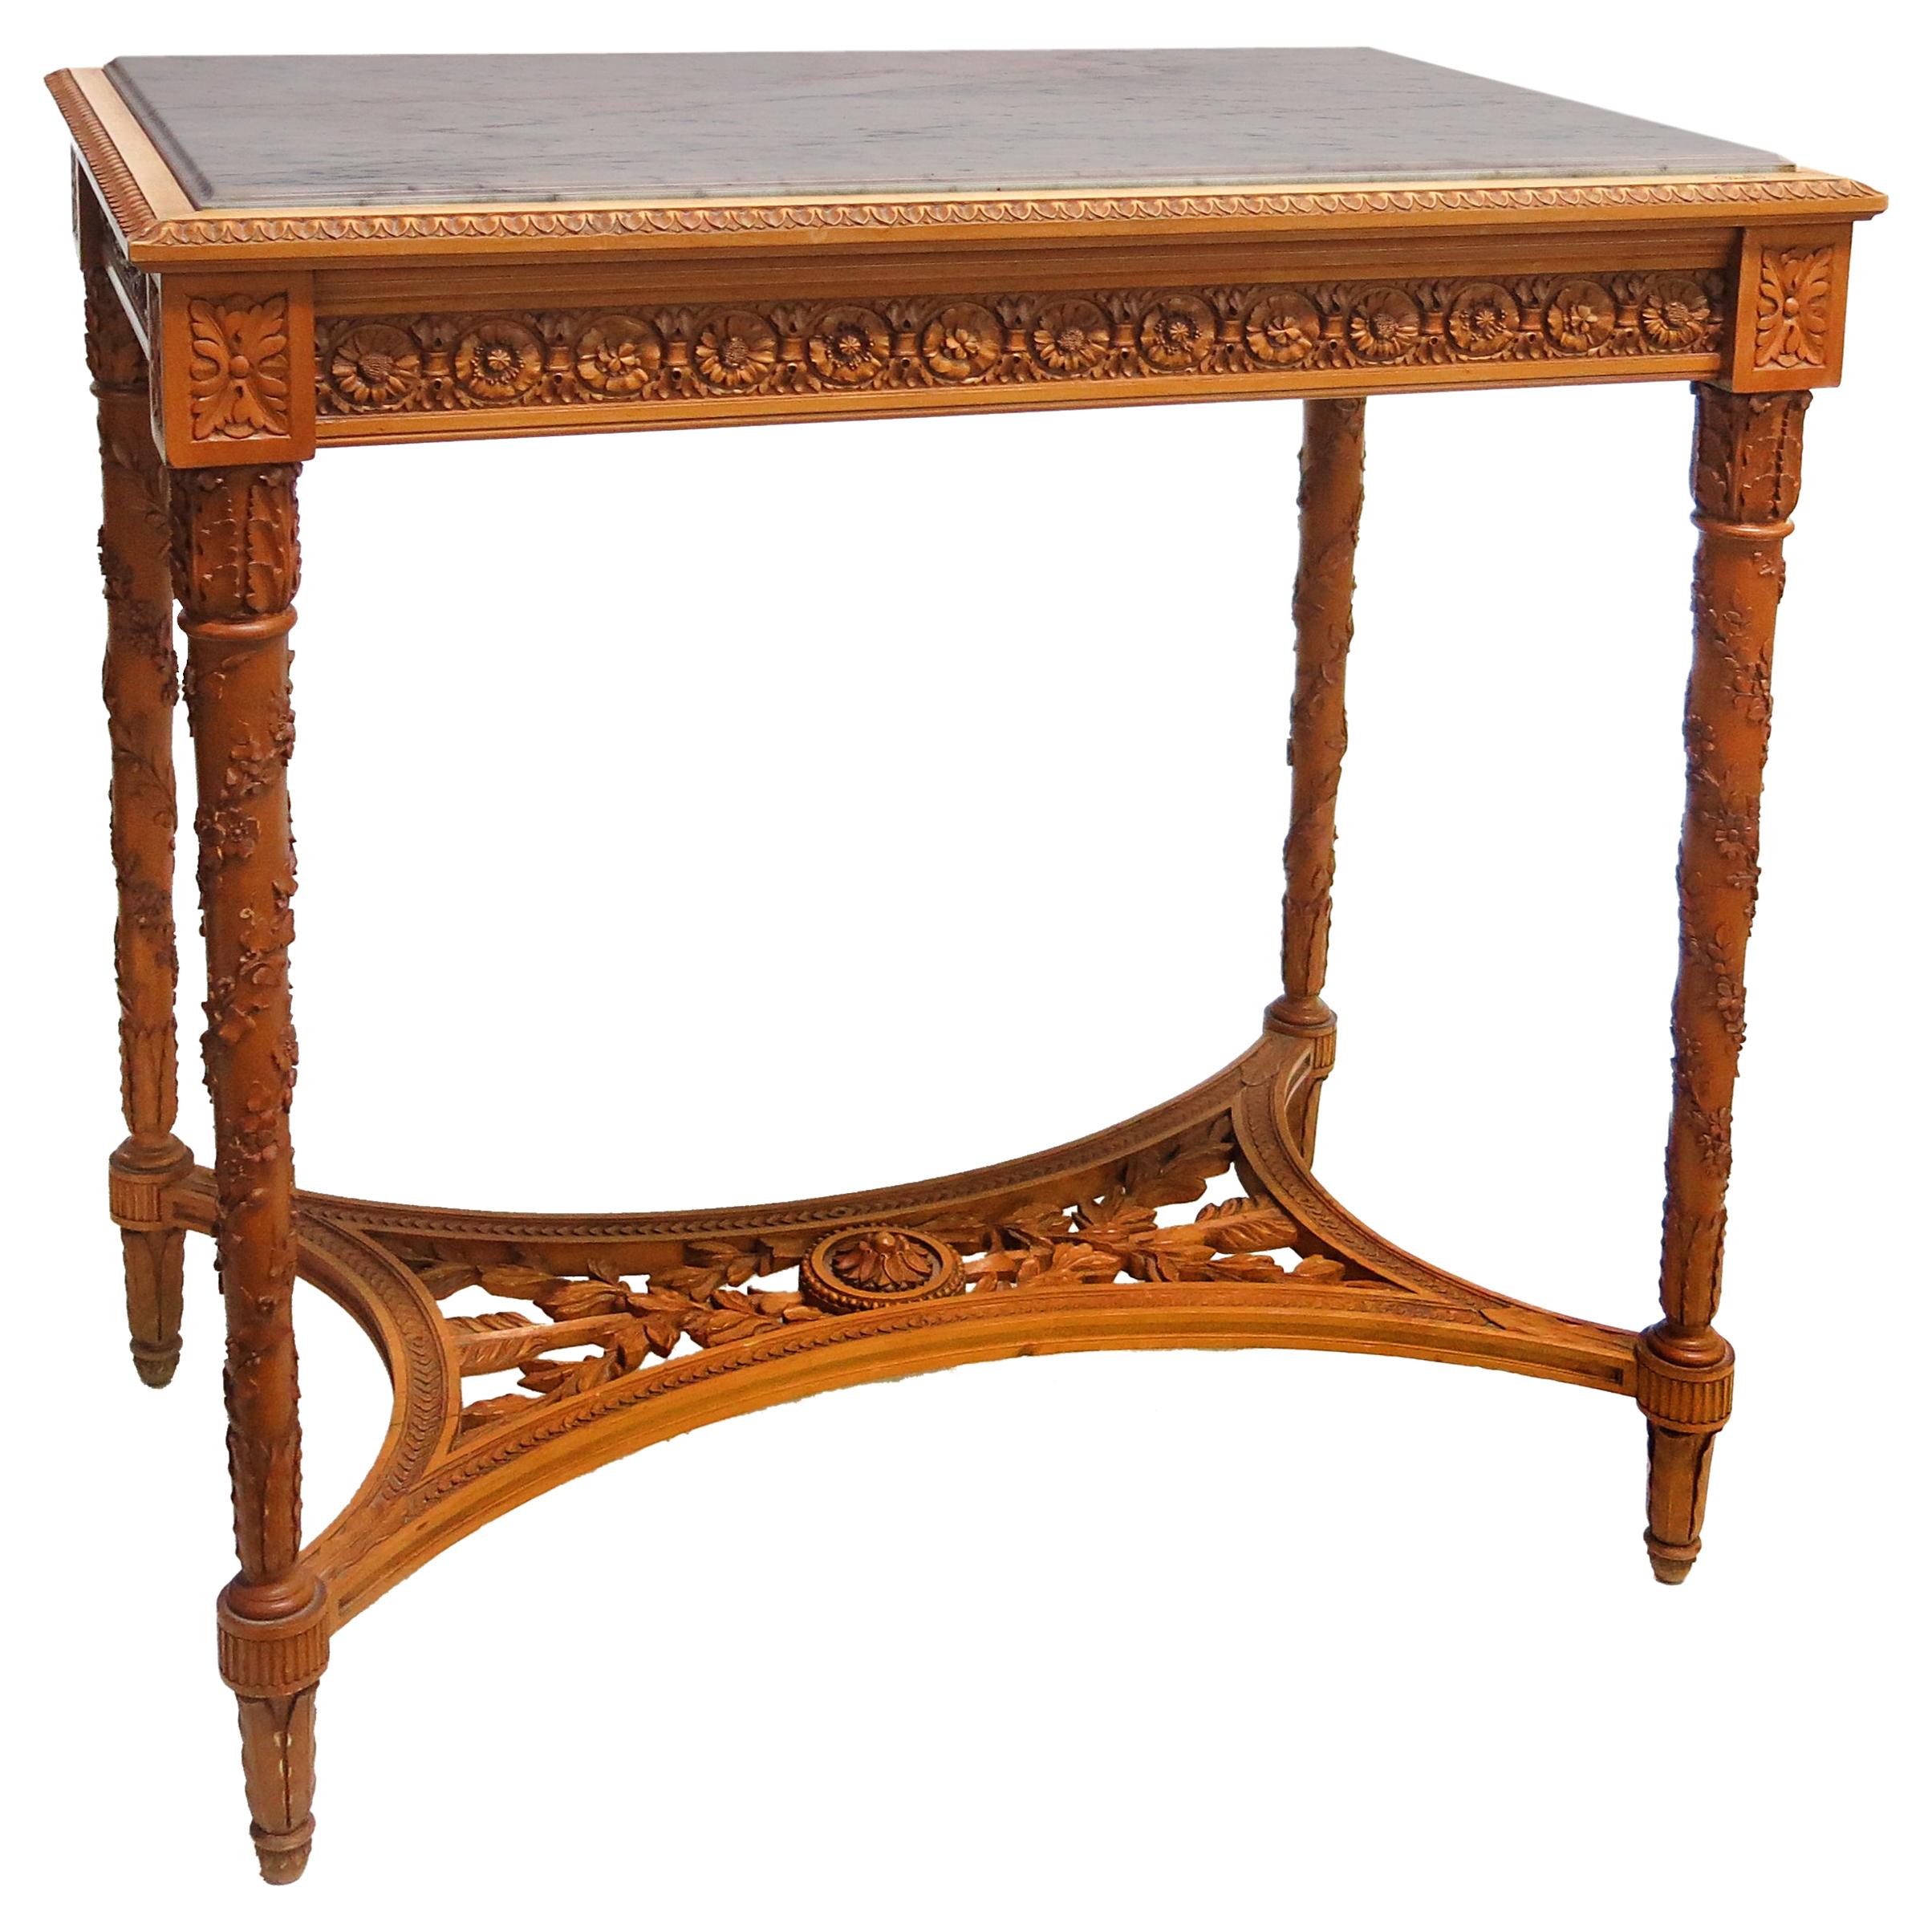 Louis XVI Style Table in Lemon Tree by Honoré Dufin, '-1892' For Sale